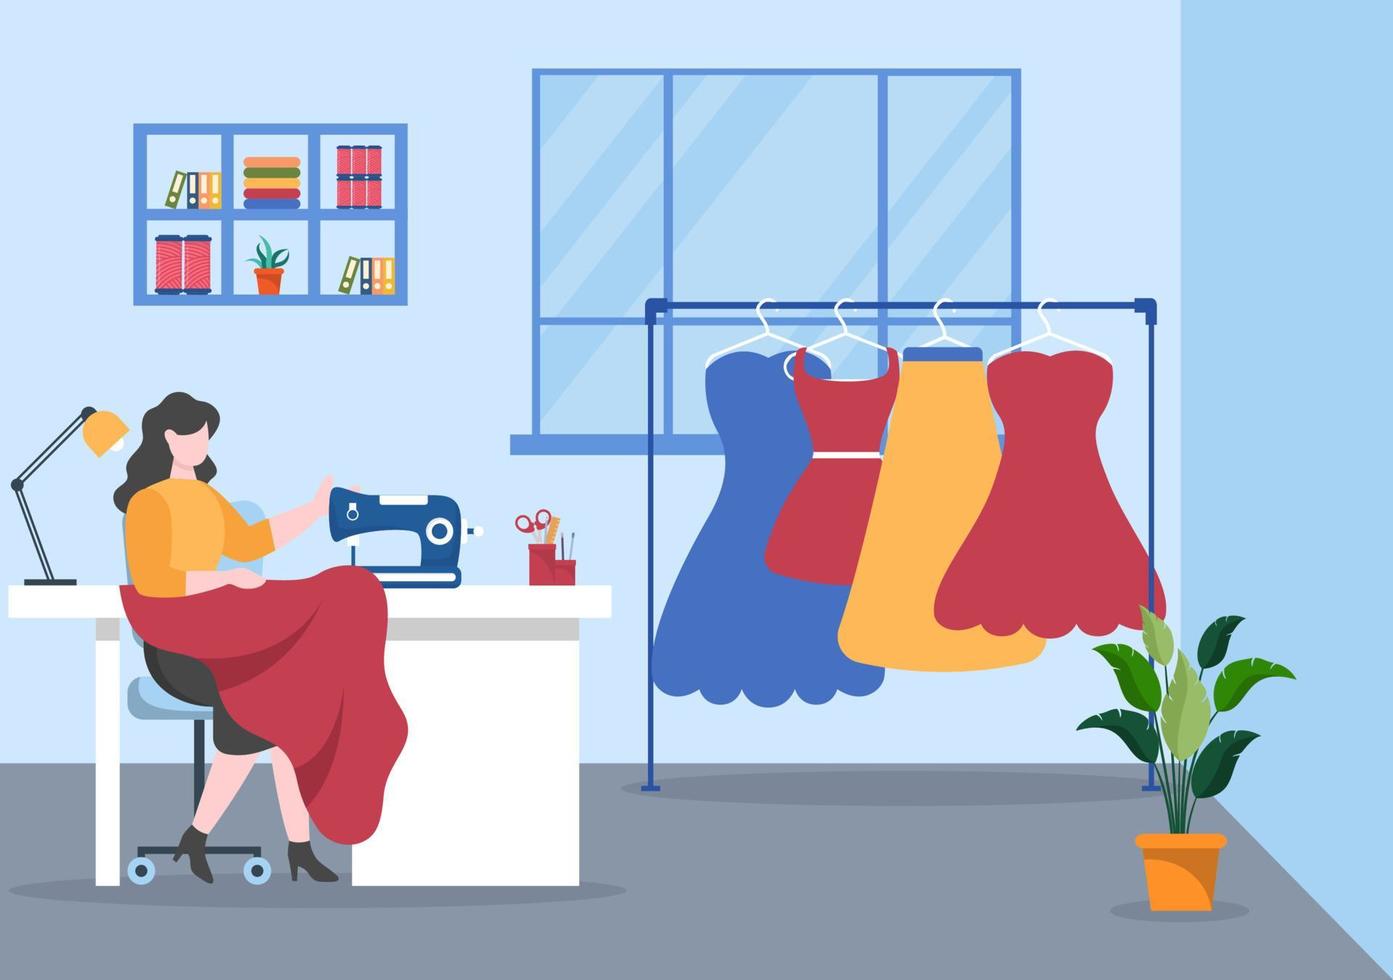 Tailor with Sewing, Cloth, Pincushion, Threads, Fashion Designer, Seamstress, Scissors and Measuring to Make Clothes in Flat Background Illustration vector